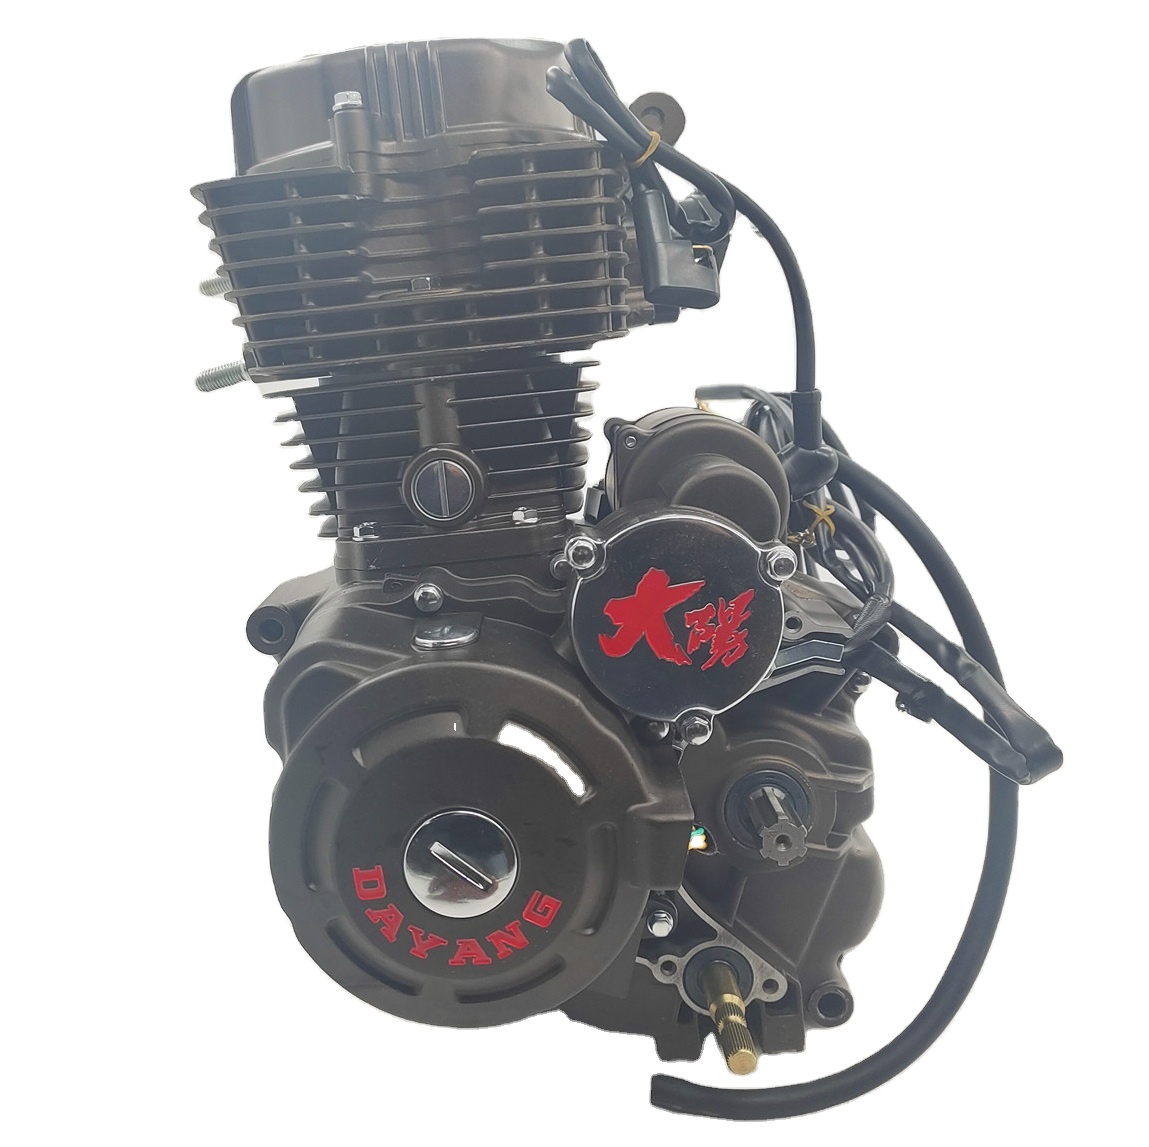 Air Cooled CG200 DAYANG Motorcycle Tricycle Engine Max Black Cylinder Assembly Style Electric/kick Method Origin Warranty